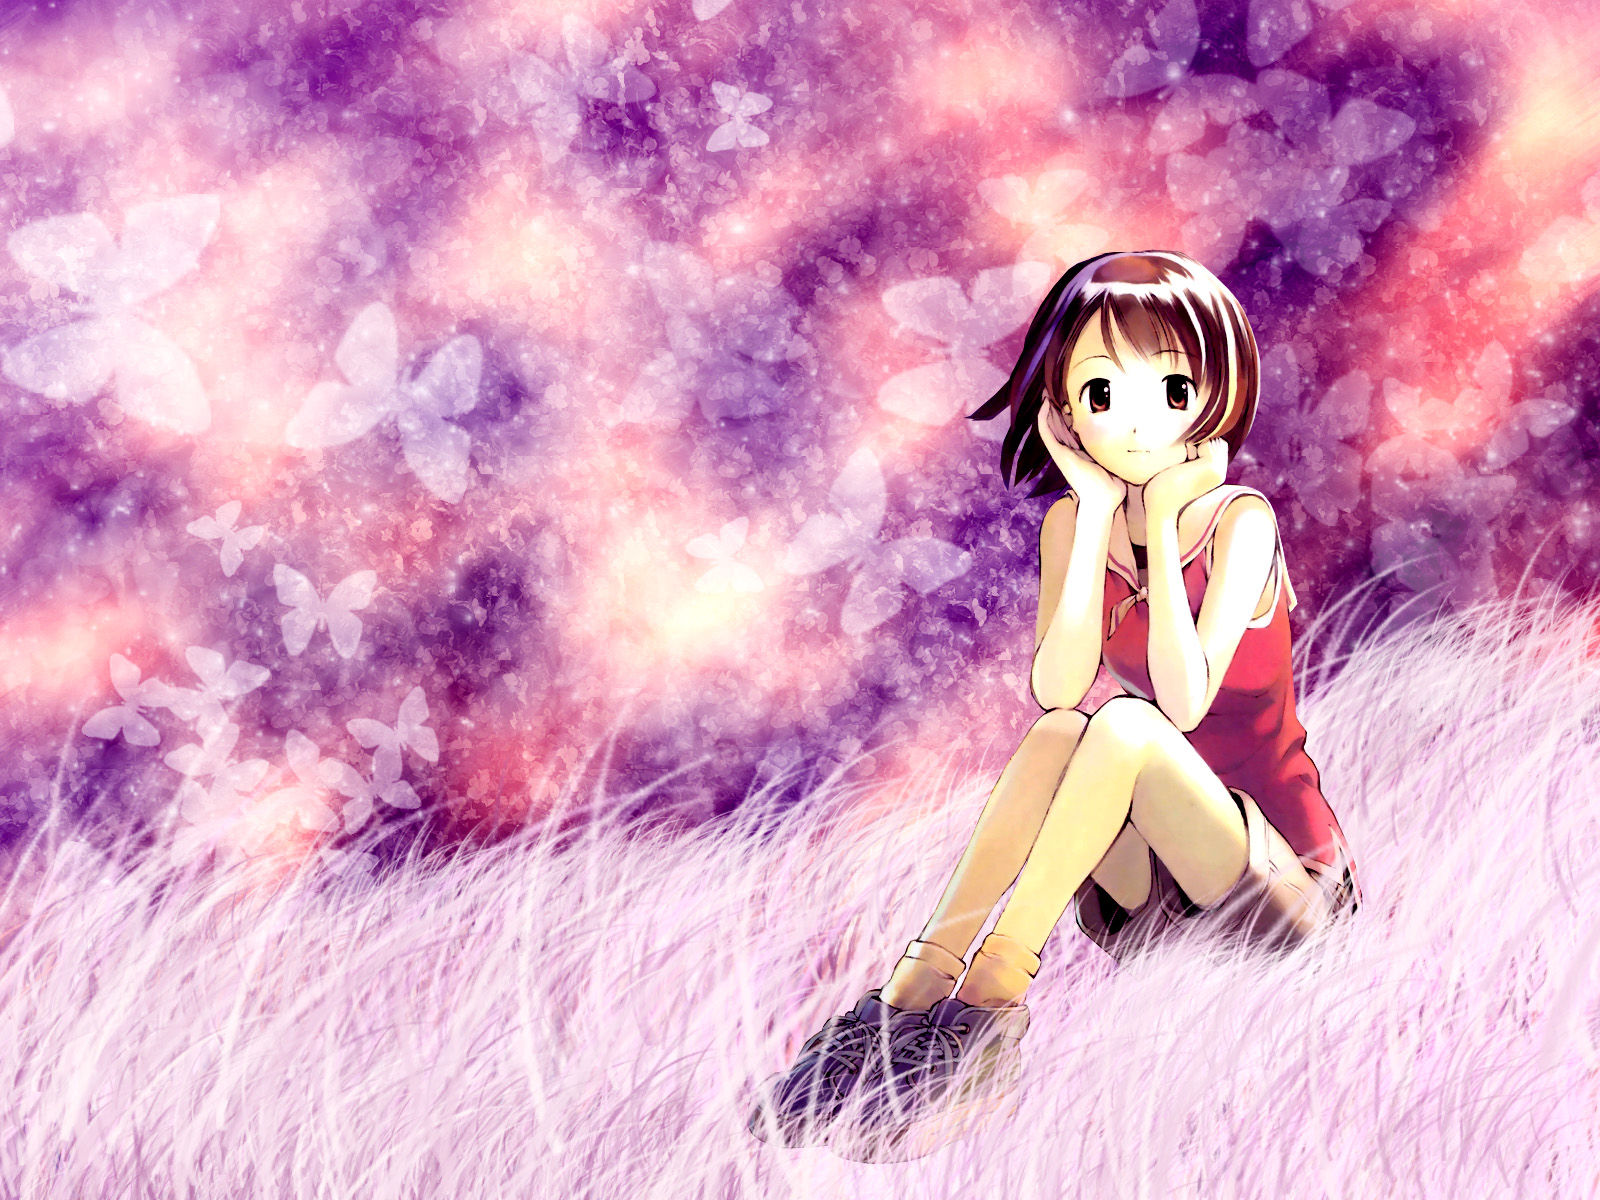 Anime Girls Wallpapers Hd Pictures - Cute Desktop Background Anime -  1600x1200 Wallpaper 